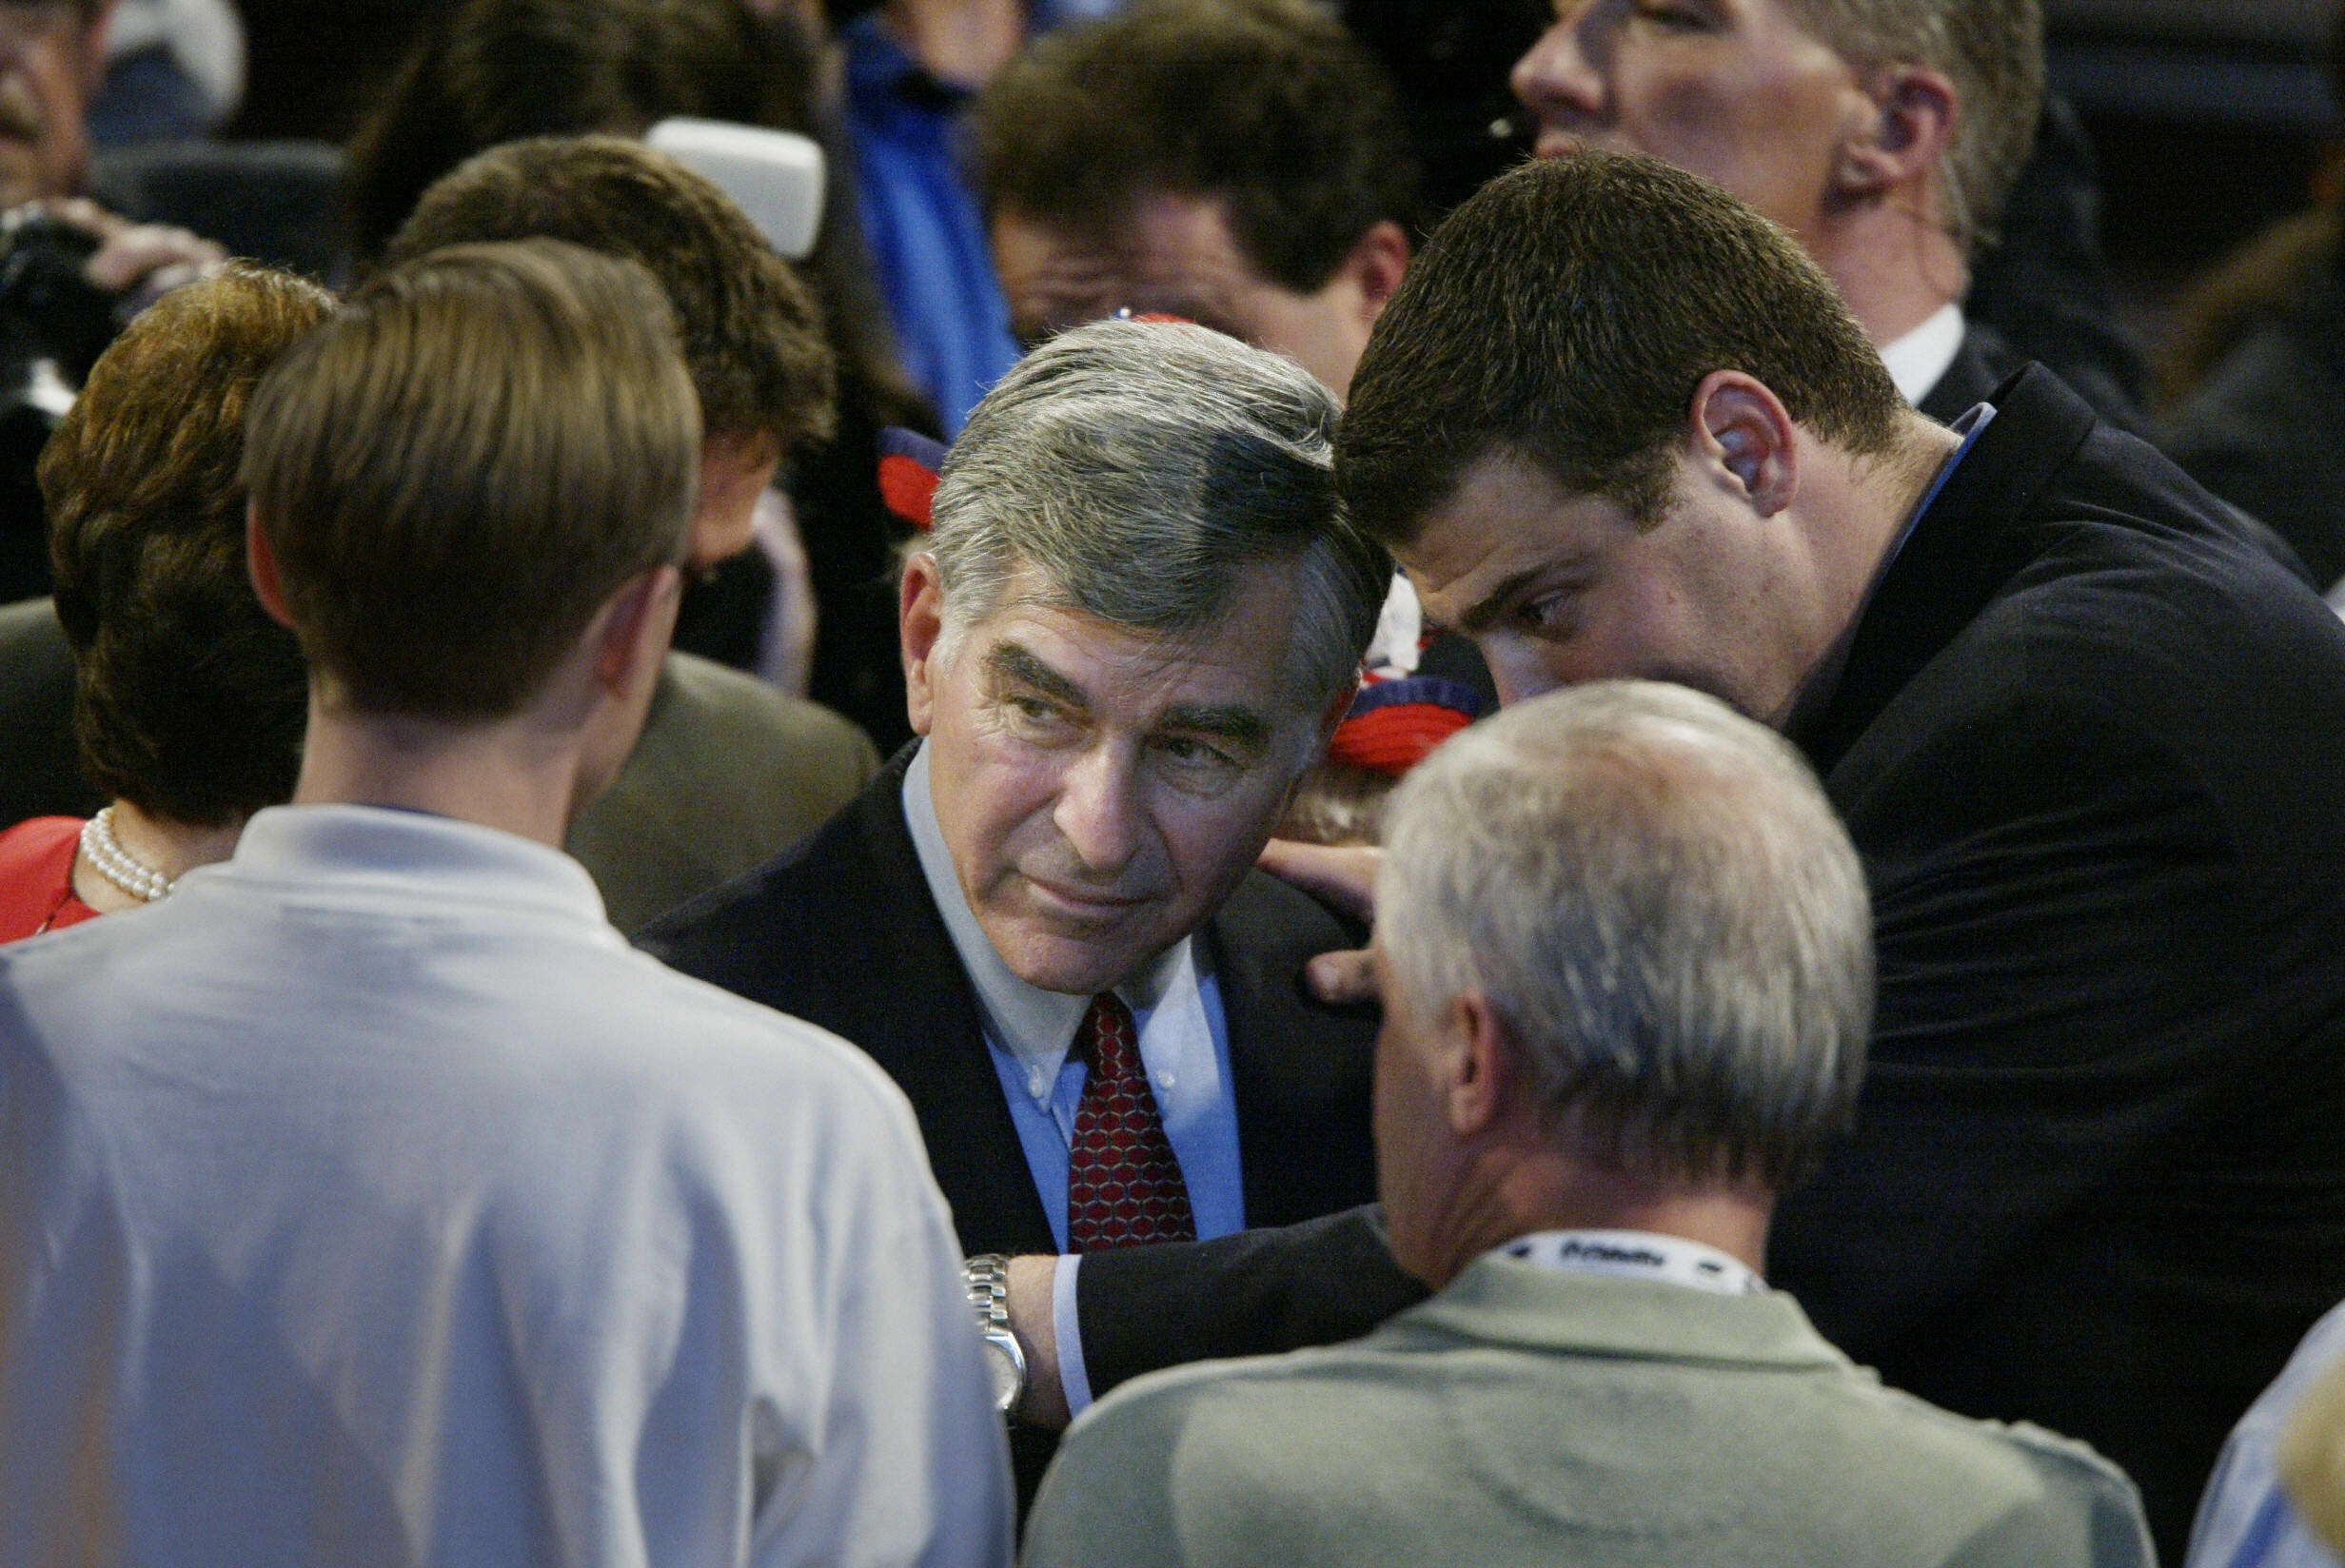 BOSTON, United States: Democratic presidential candidate of 1988 Michael Dukakis speaks with delegates at the Democratic National Convention 28 July, 2004, in Boston, Massachusetts. Dukakis lost the 1988 election to George Bush. AFP PHOTO/PAUL J. RICHARDS (Photo credit should read PAUL J. RICHARDS/AFP via Getty Images)